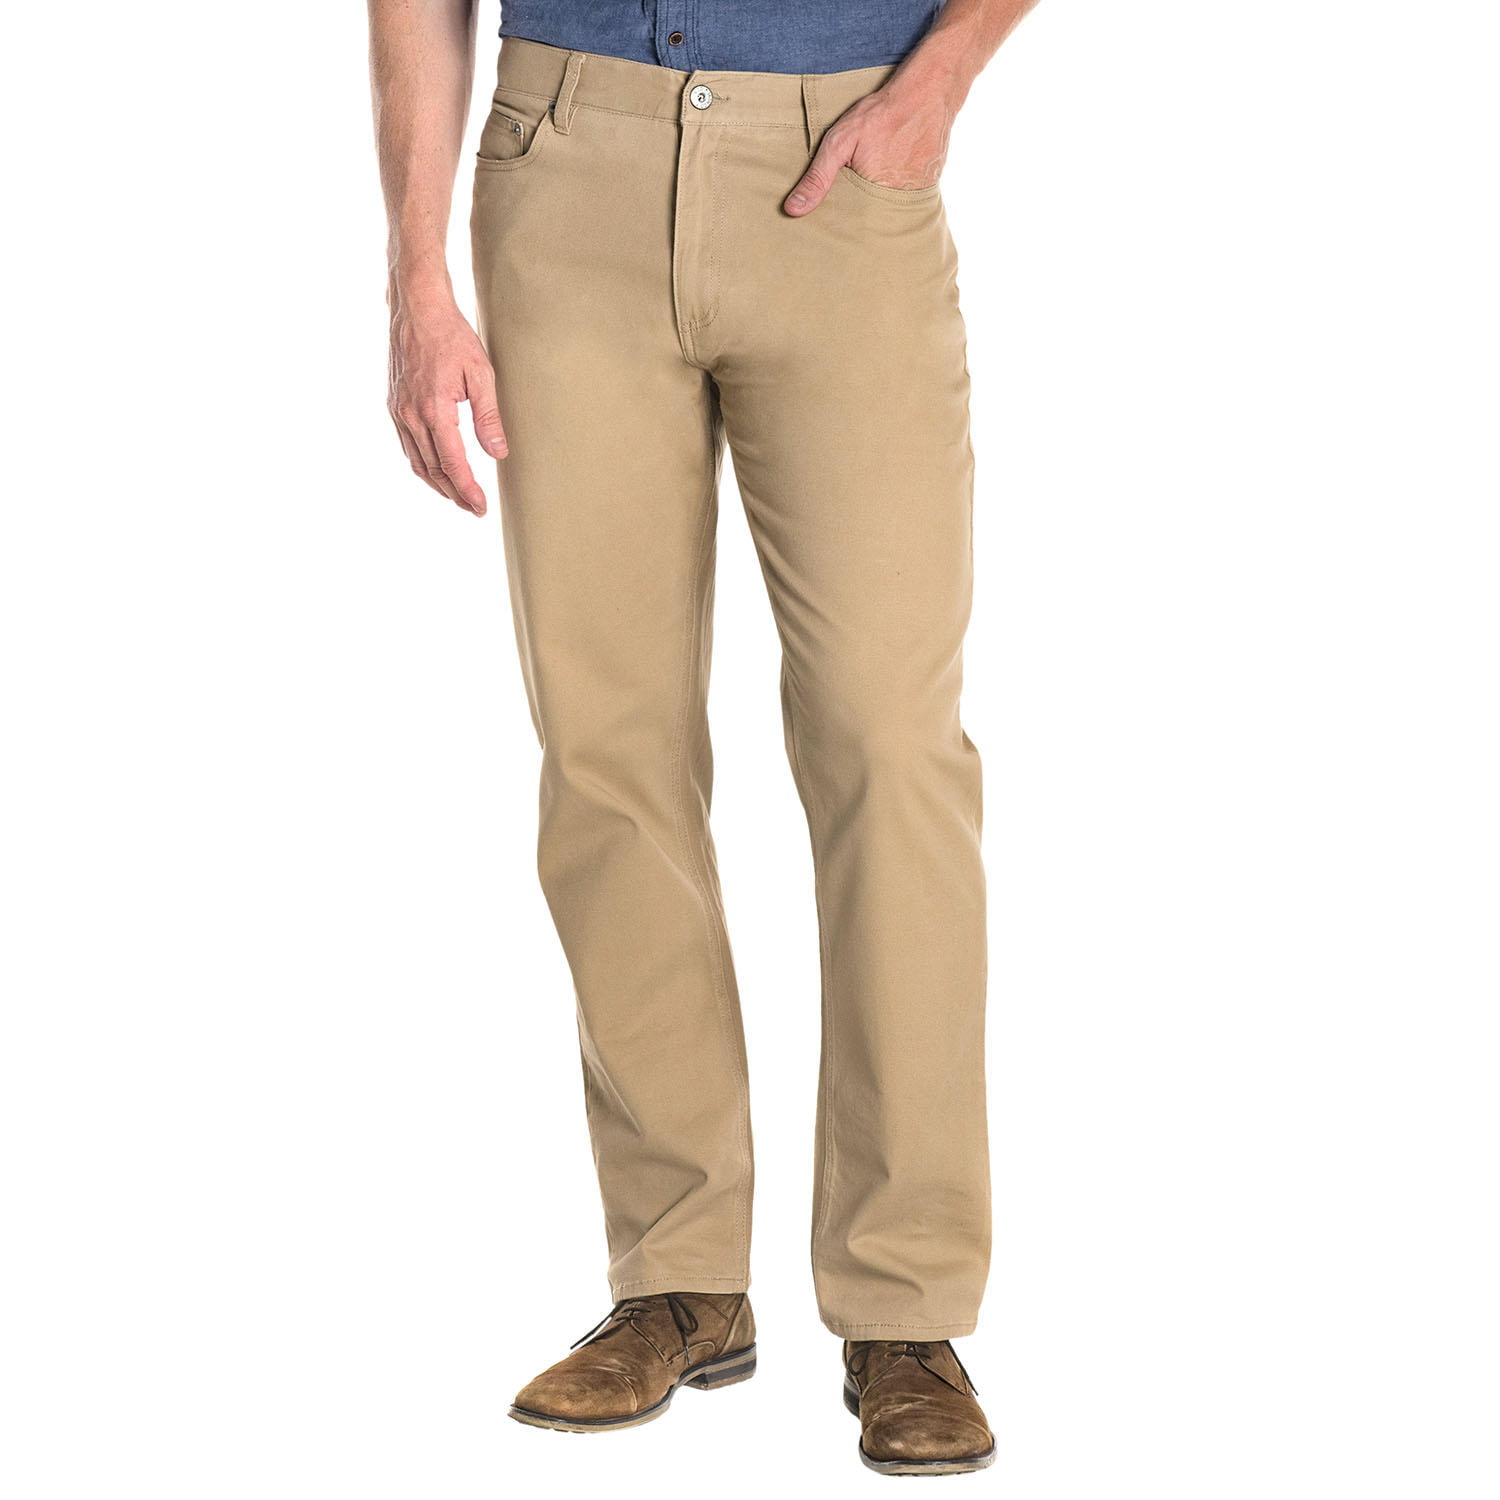 Iron Clothing Patriot Men's 5-Pocket Stretch Twill Pant in Burlap, Size ...